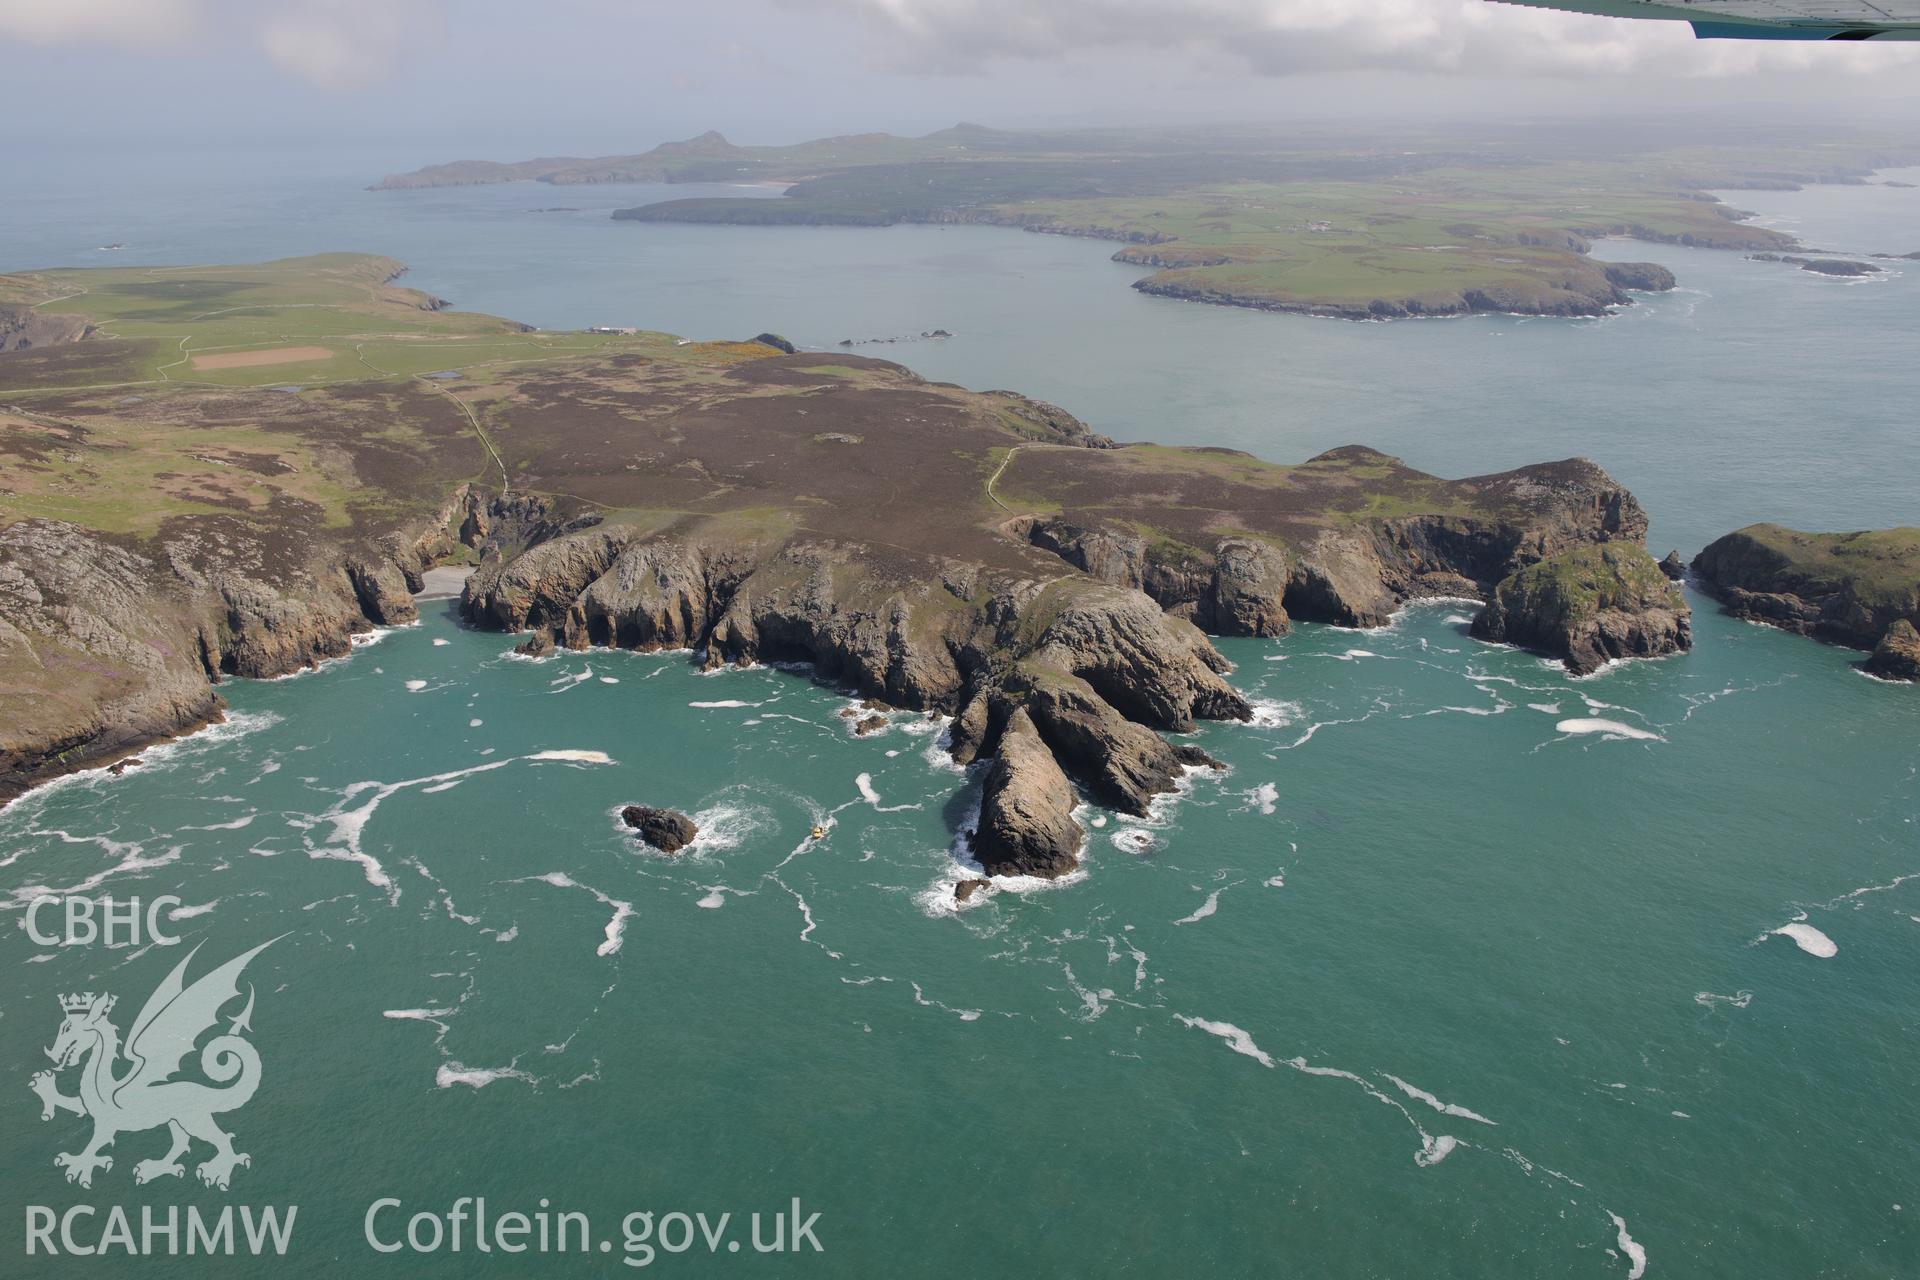 Southern tip of Ramsey Island, off the coast near St Davids. Oblique aerial photograph taken during the Royal Commission's programme of archaeological aerial reconnaissance by Toby Driver on 13th May 2015.